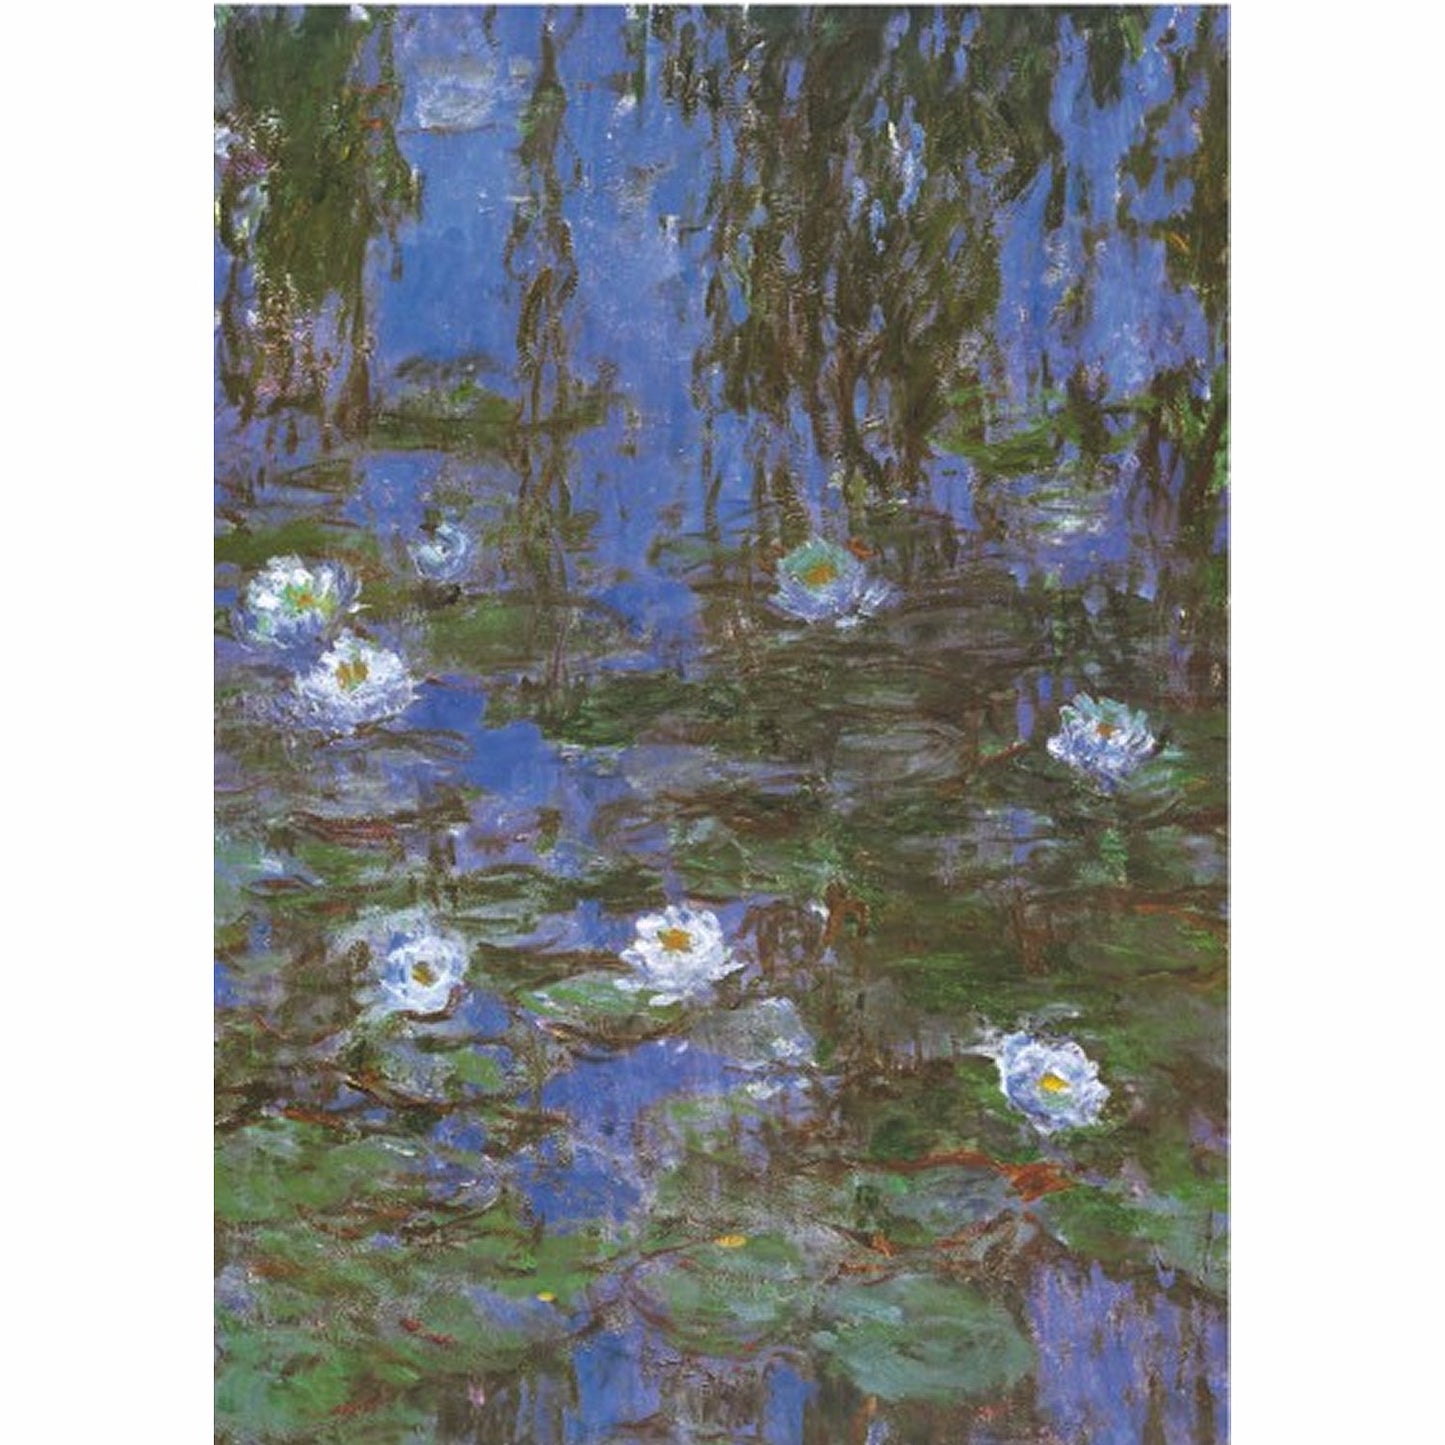 Dtoys - Monet : Water Lilies - 1000 Piece Jigsaw Puzzle